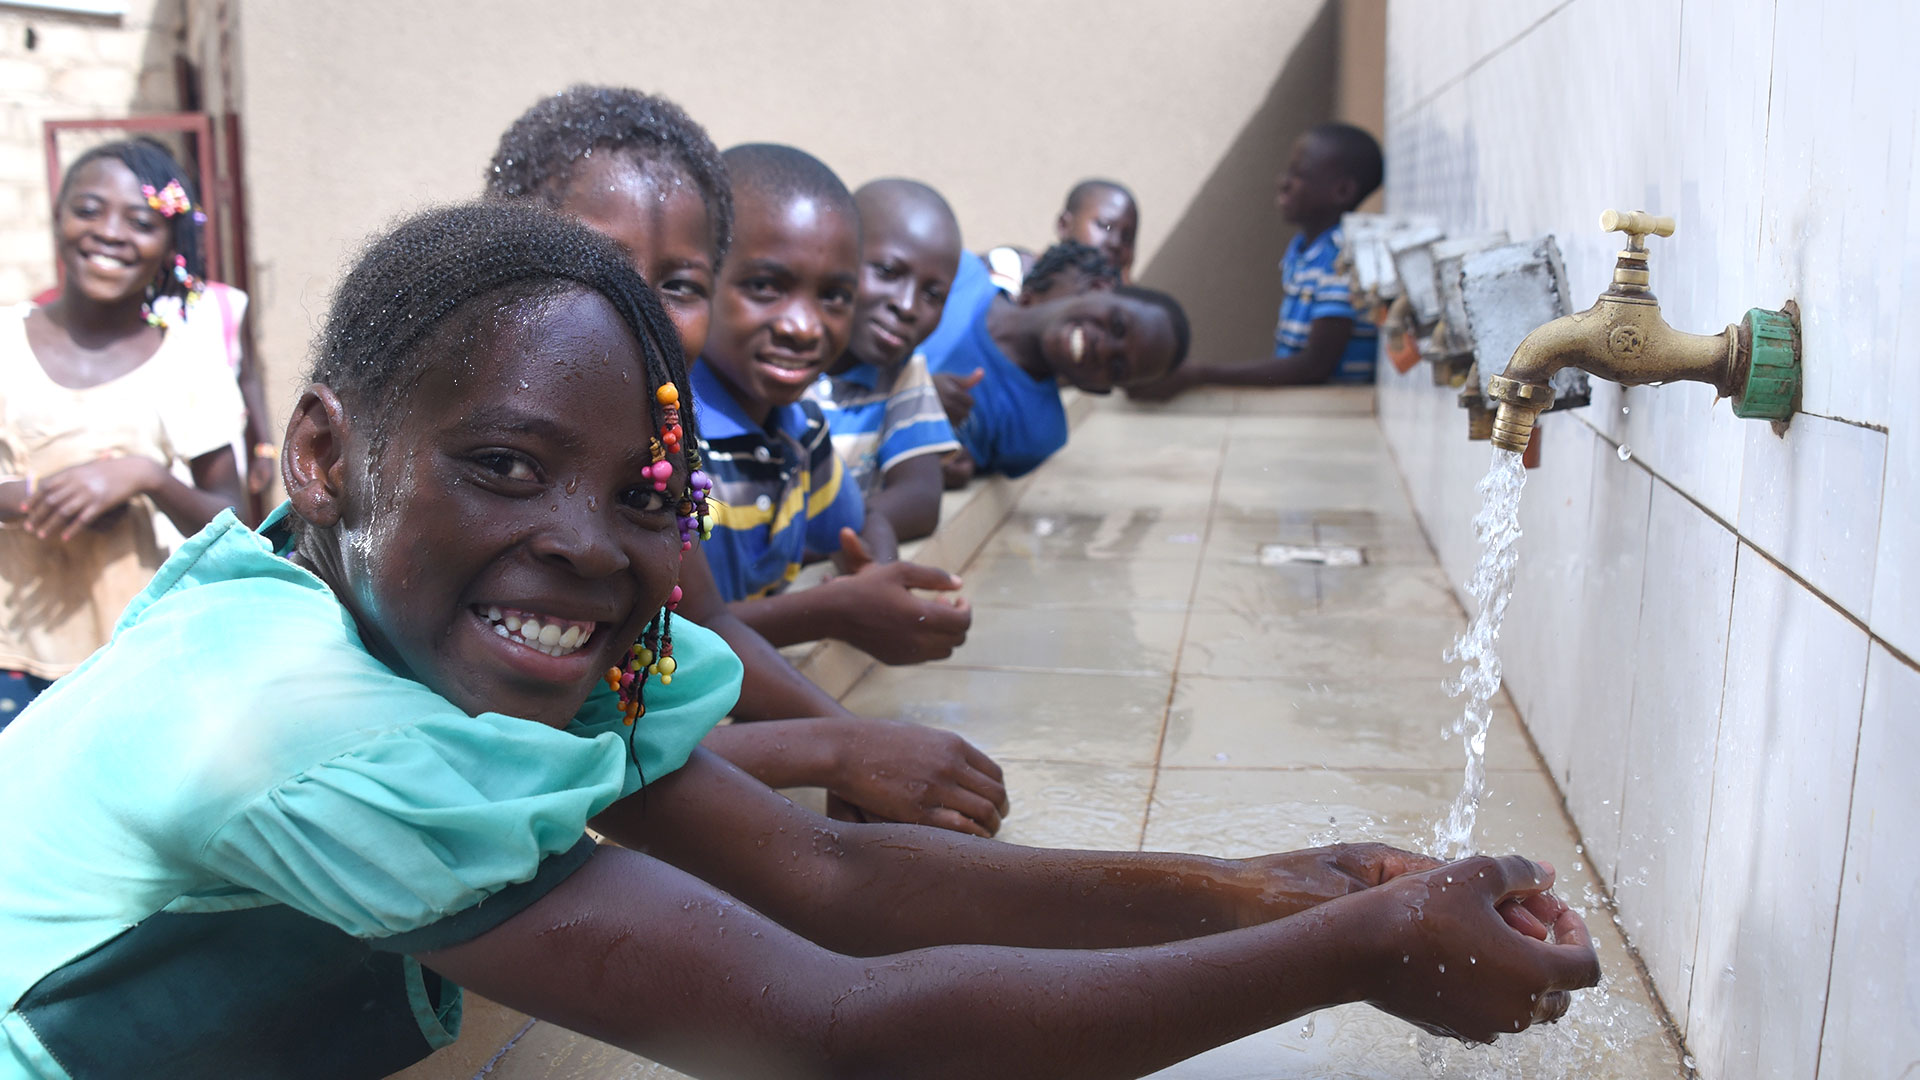 The solar system powers water taps at the Compassion center